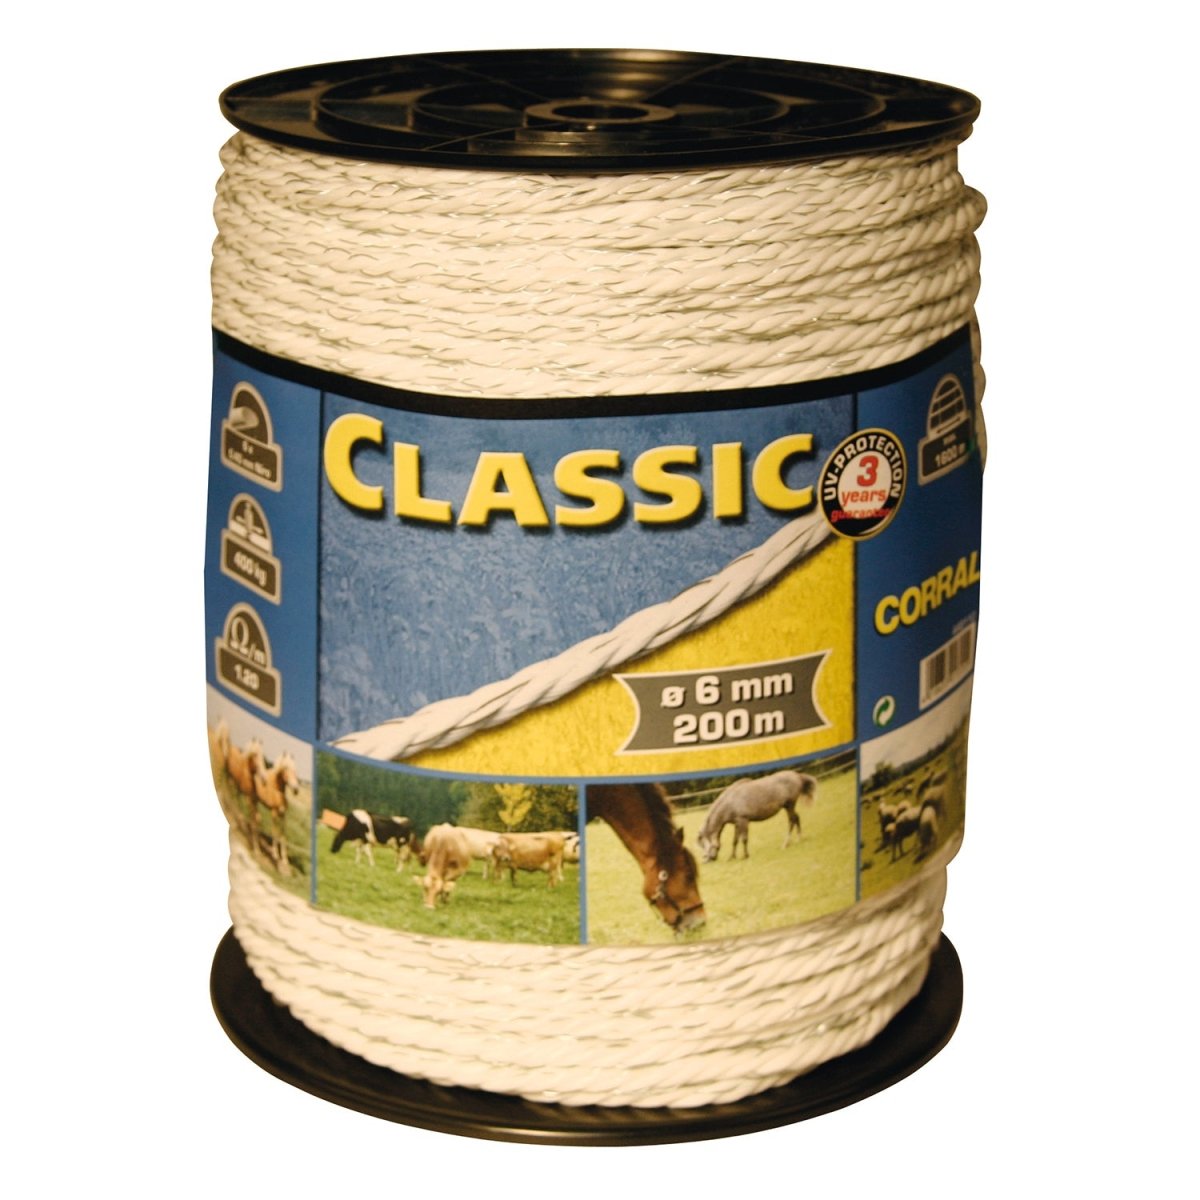 Corral Classic Fencing Polywire - 200M -